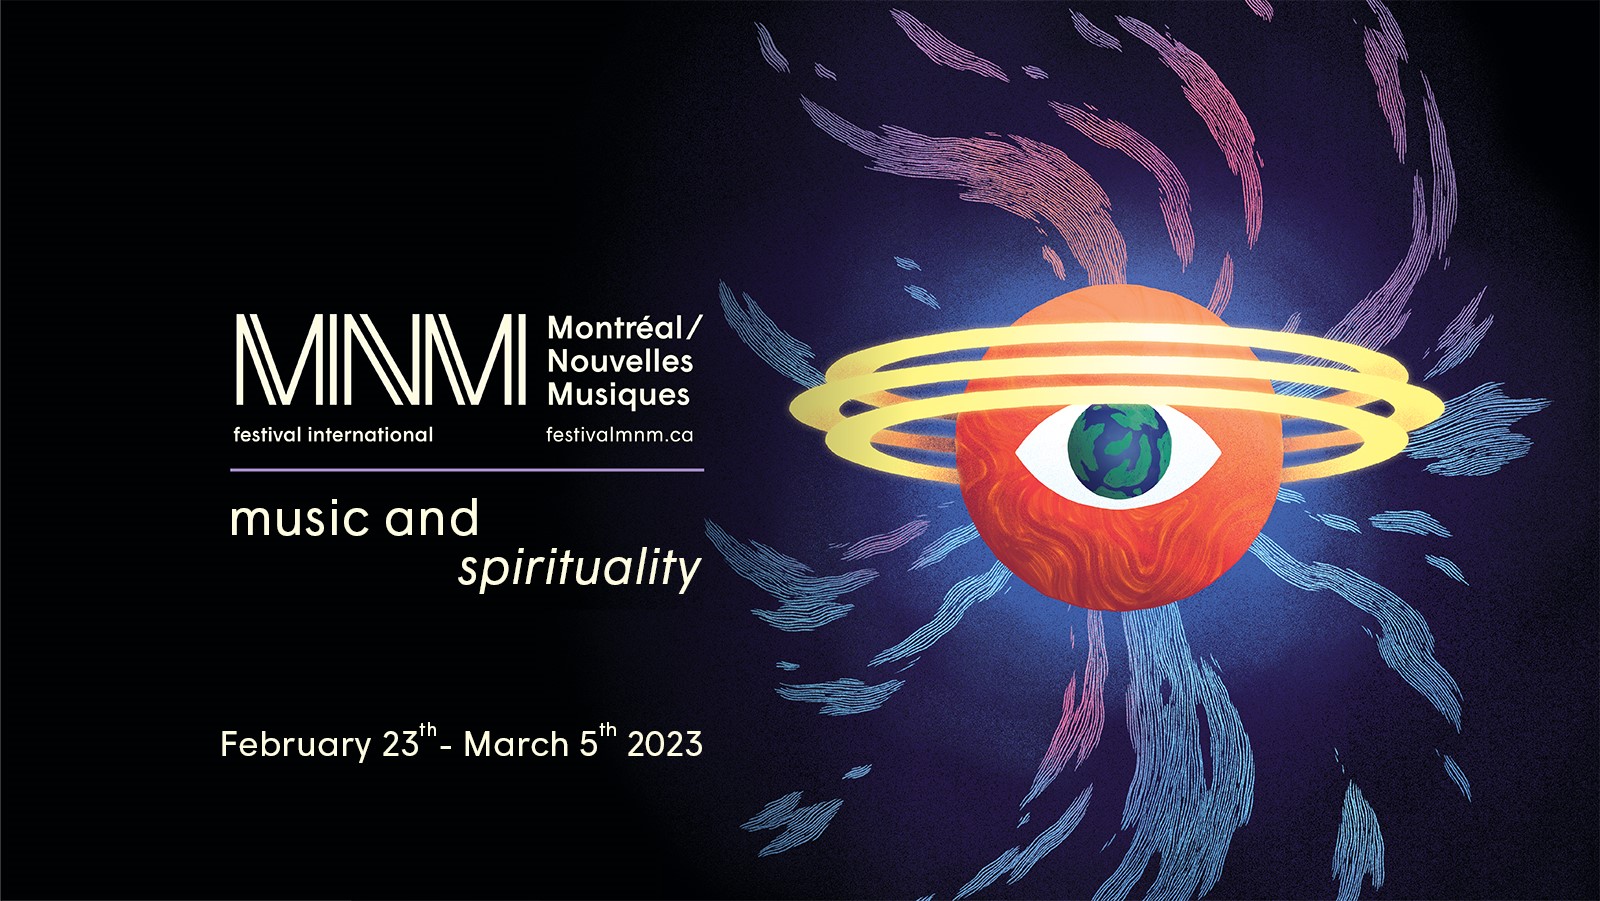 Montreal/New Musics festival 2023 – 11th edition: Music and Spirituality